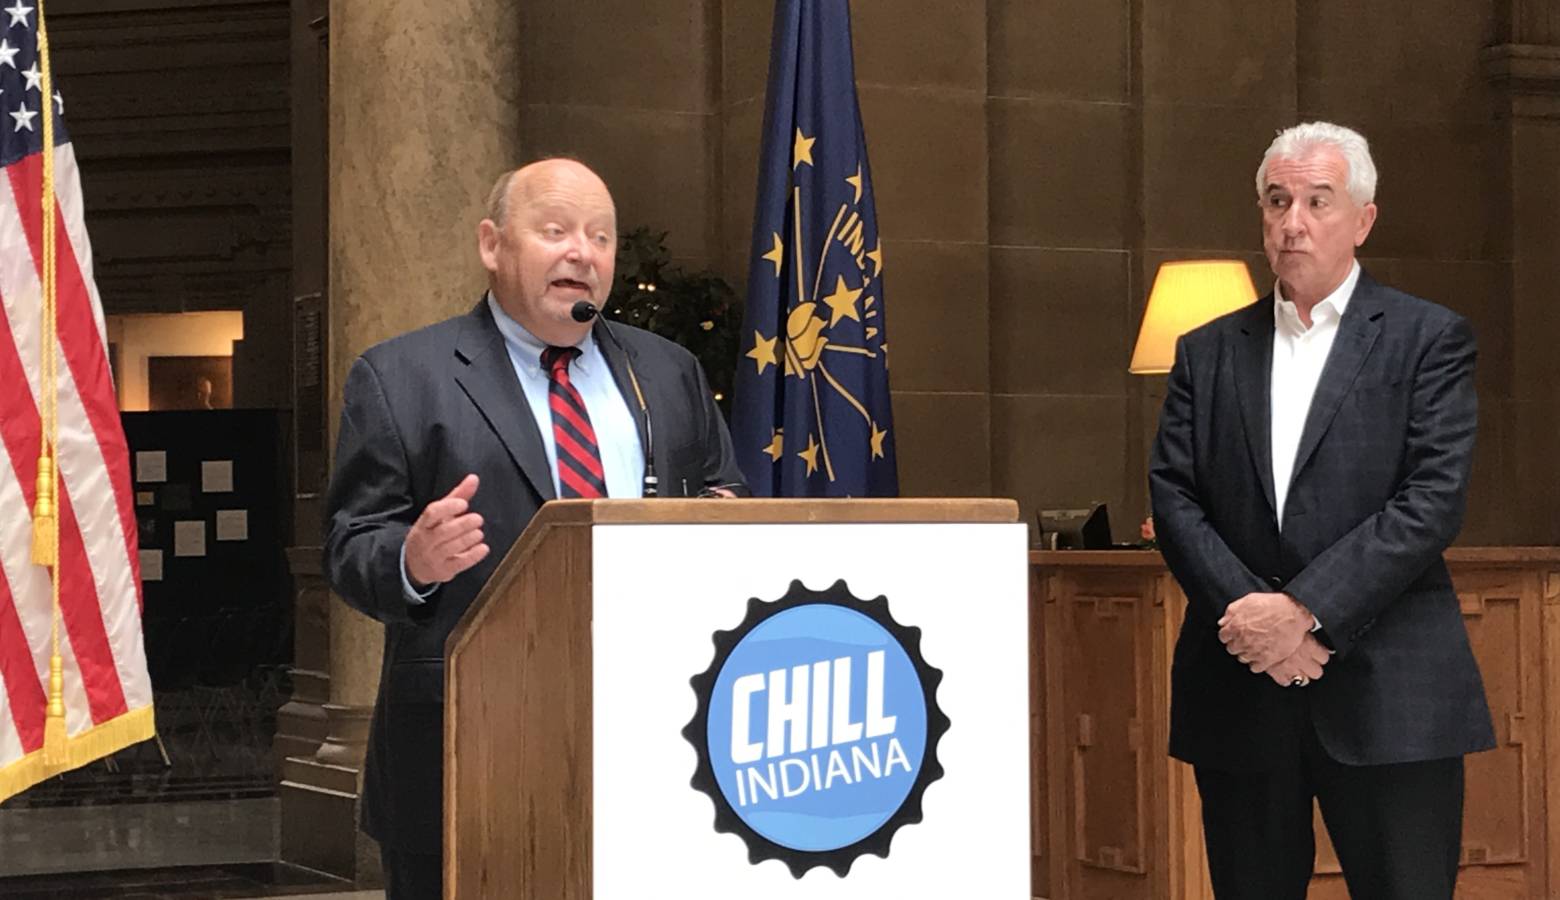 Indiana Petroleum Marketers and Convenience Store Association executive director Scot Imus discusses the launch of Chill Indiana. Rickers CEO Jay Ricker (right) will be involved with the campaign. (Brandon Smith/IPB News)